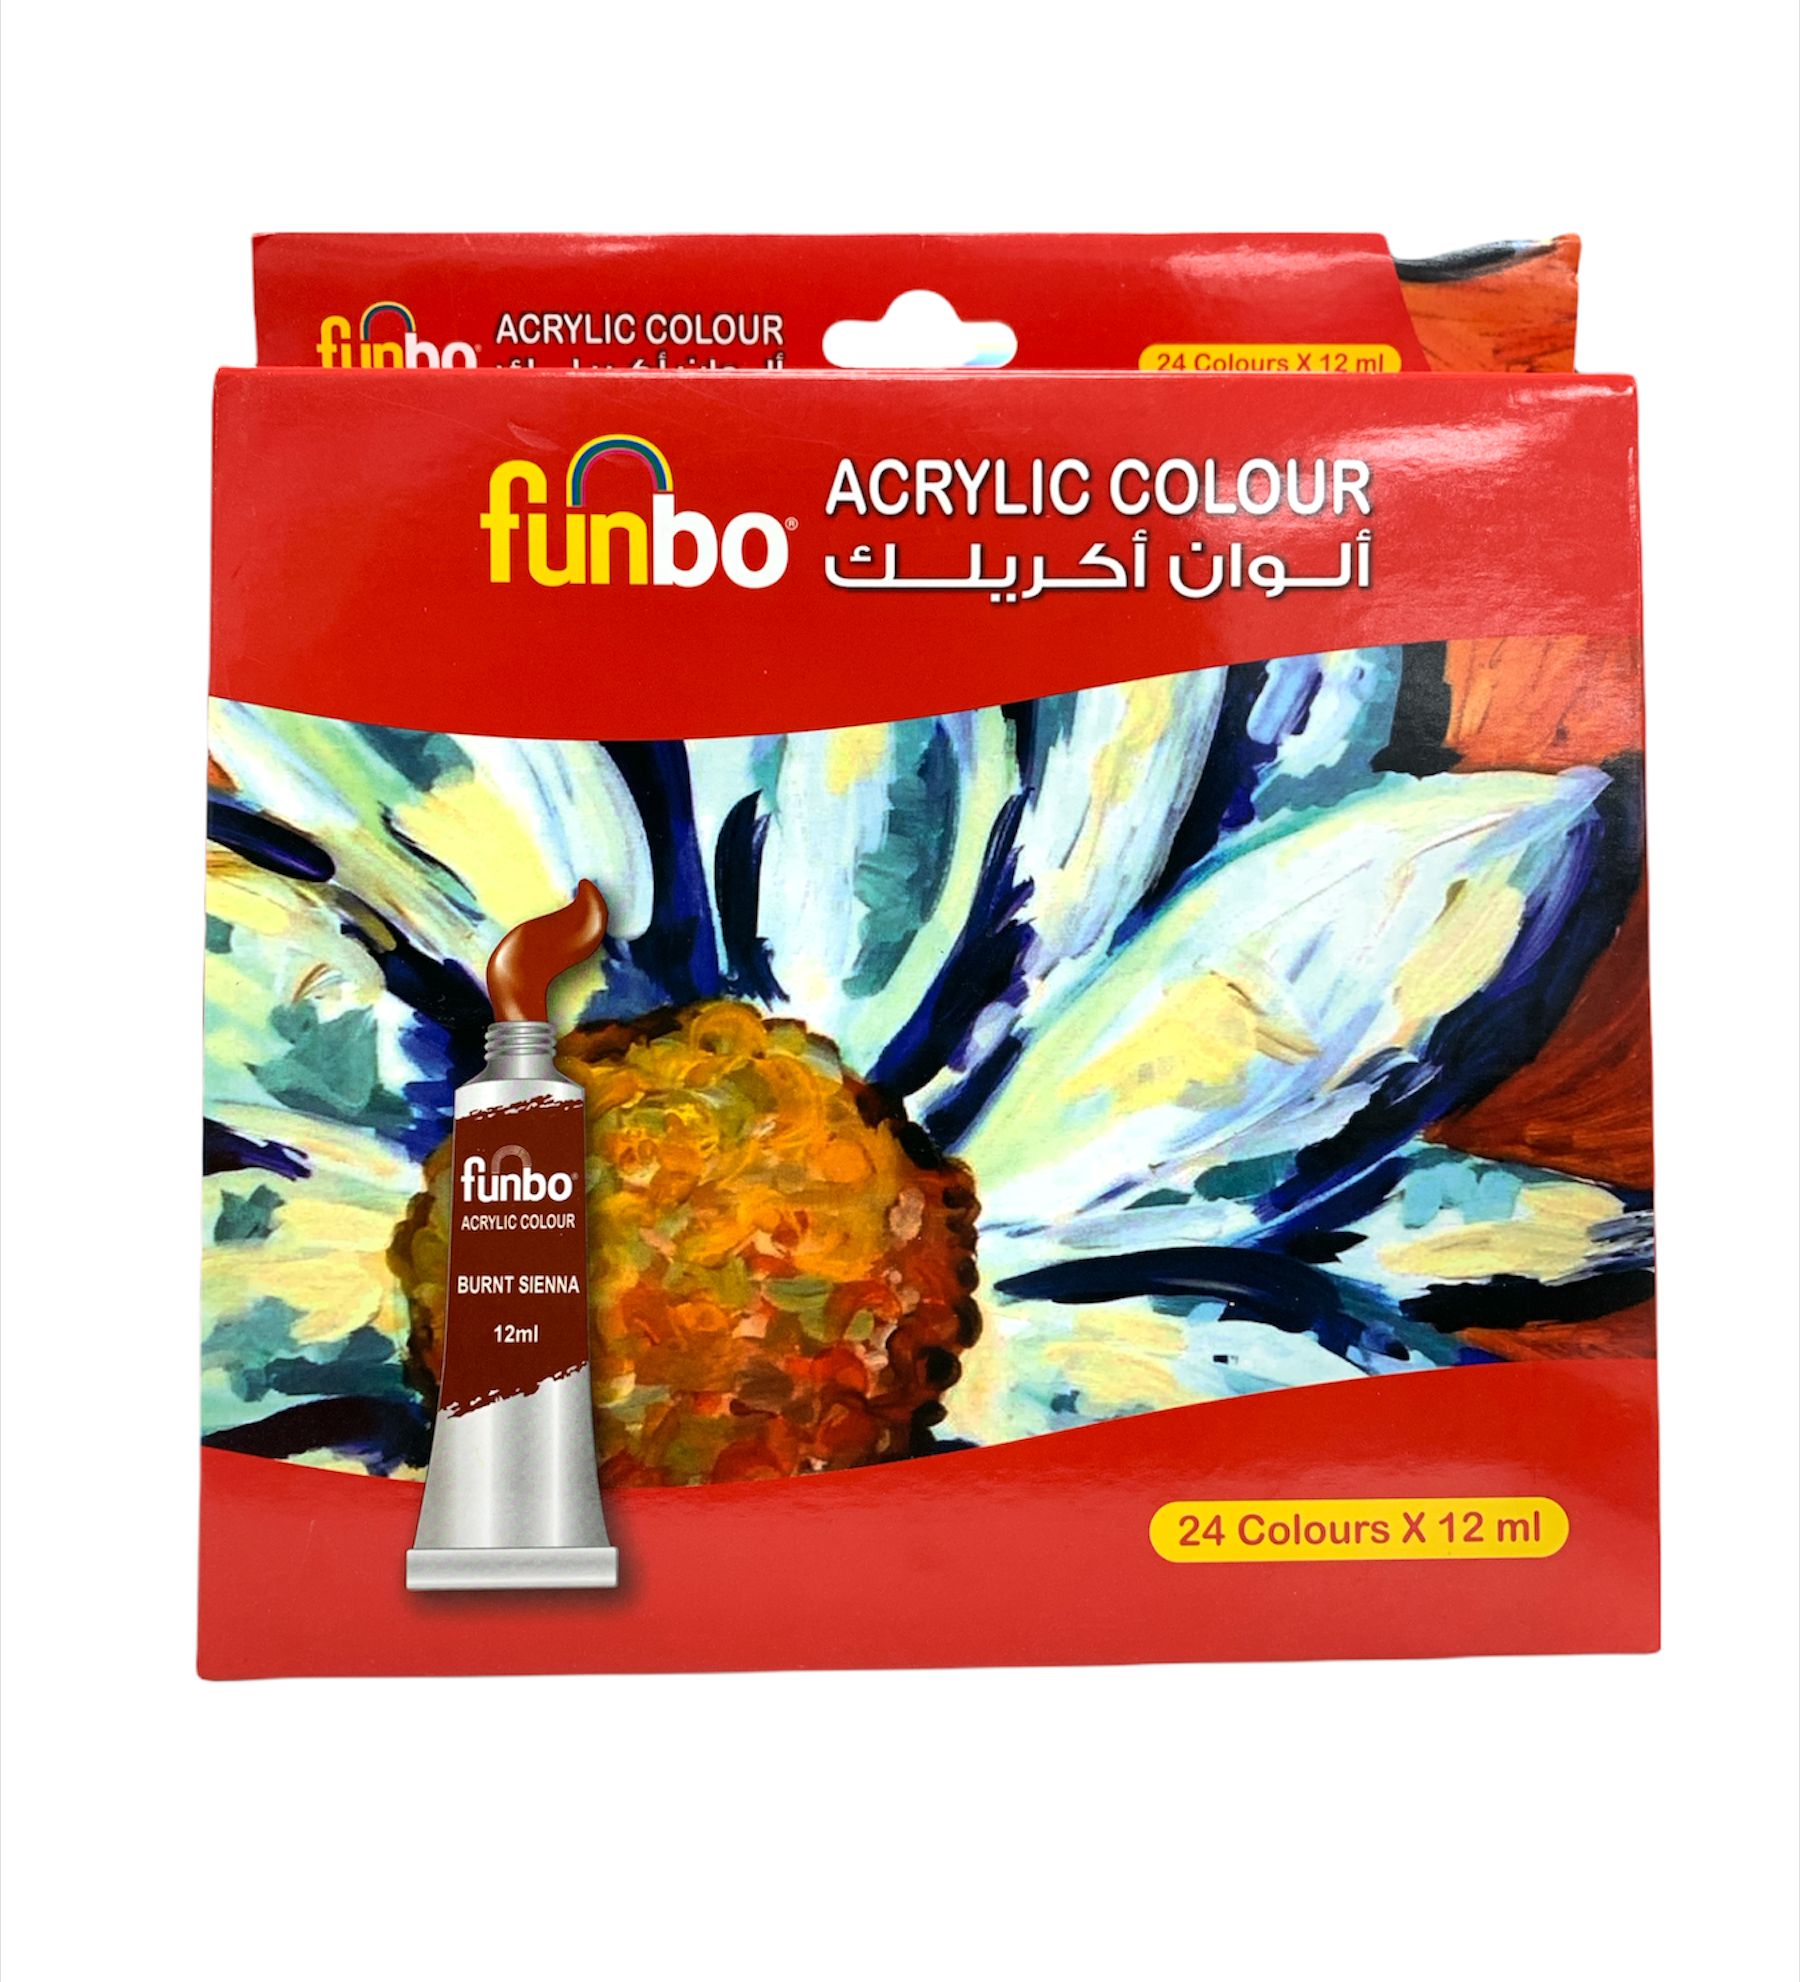 Funbo Acrylic Colors || الوان اكريليك فنبو